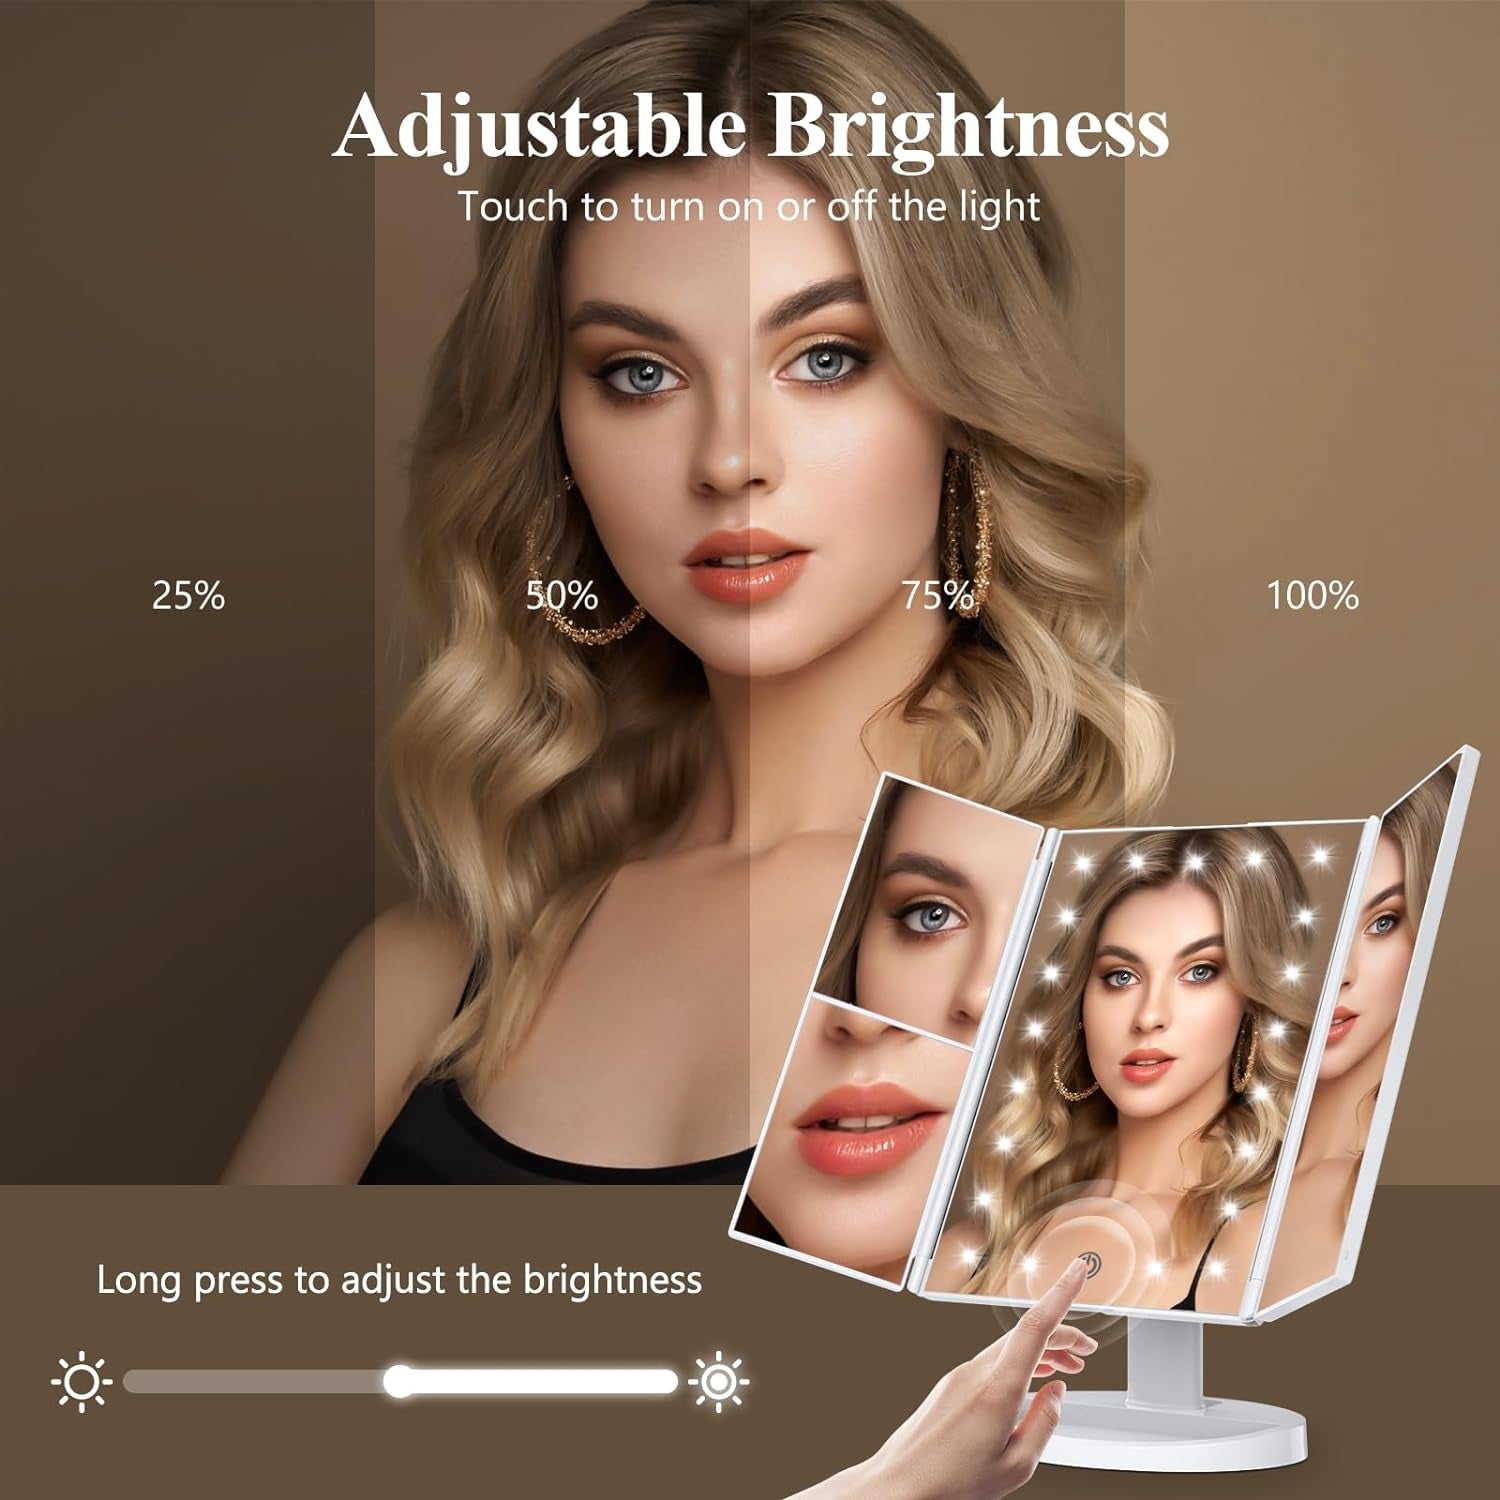 "Illuminate Your Beauty: Tri-Fold LED Makeup Mirror with Touch Control, 10X Magnification, and Dual Power Supply - Perfect Women's Gift in Elegant White"